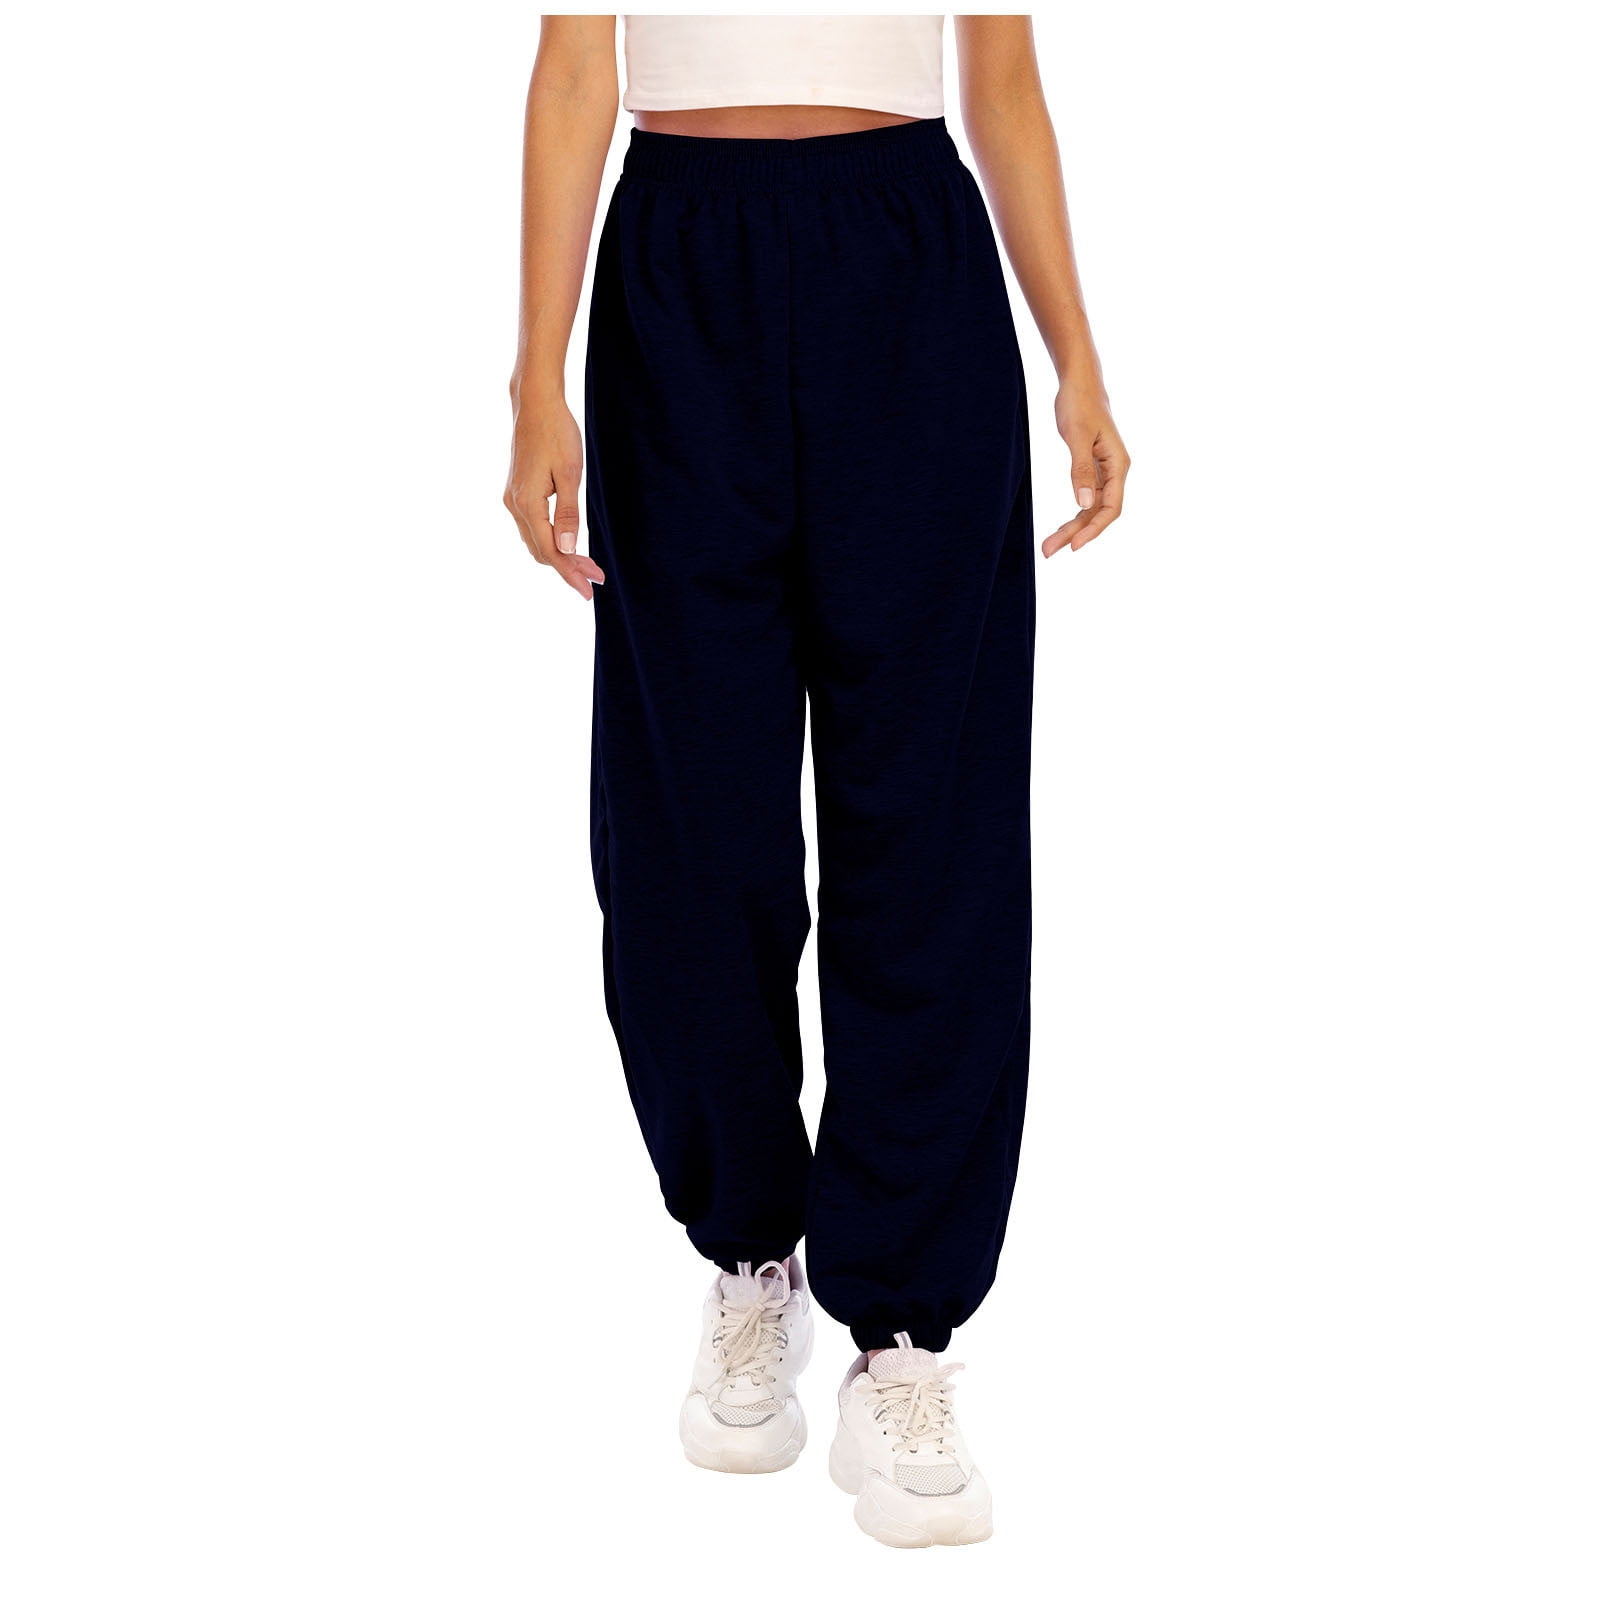 XFLWAM Women’s Casual Baggy Sweatpants High Waisted Running Joggers Pants  Athletic Trousers with Pockets Drawstring Track Pants Pink XL